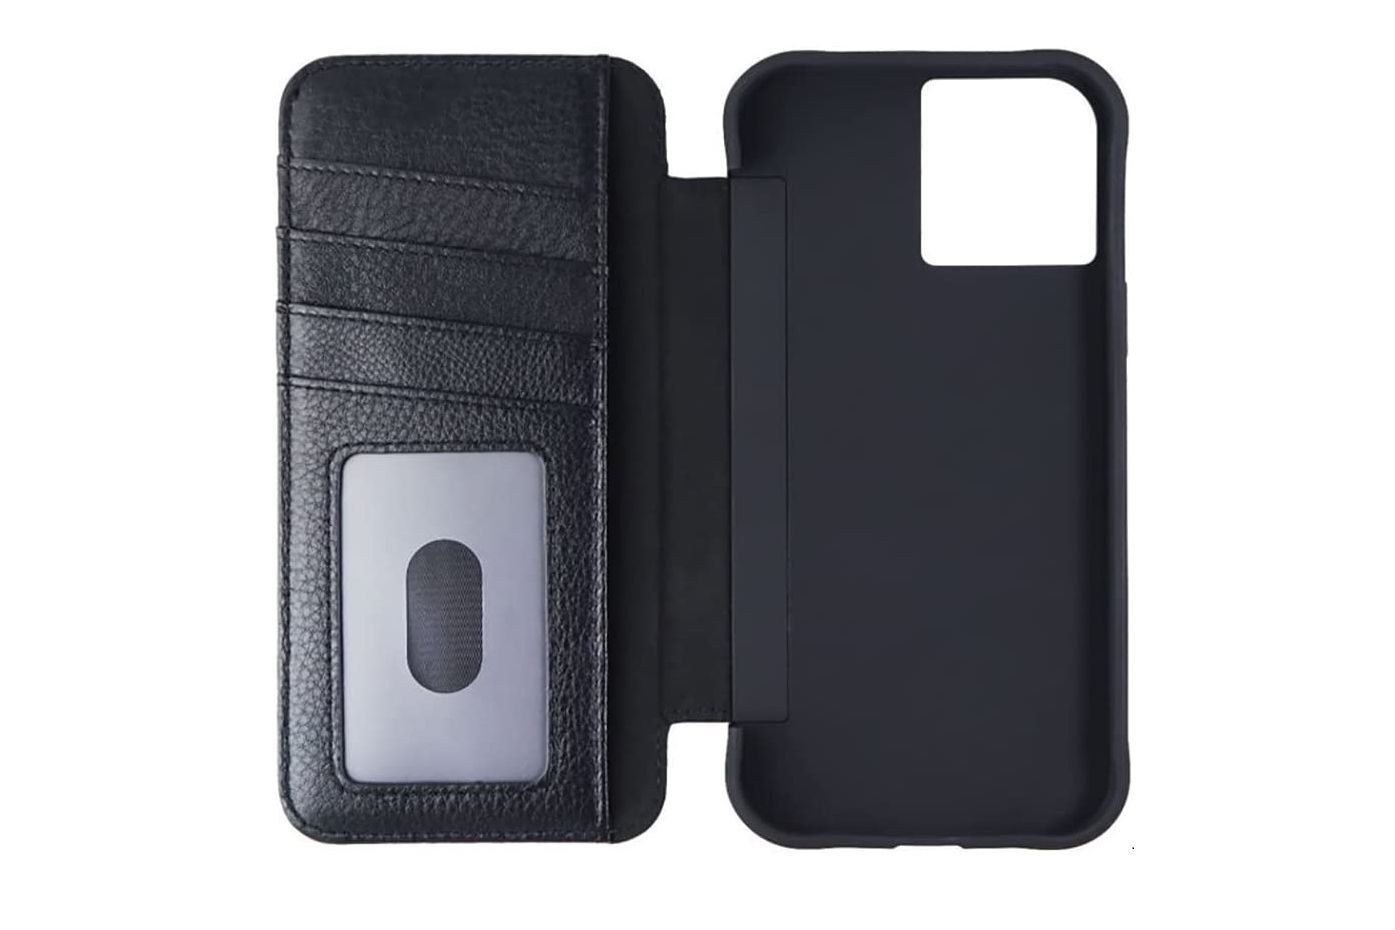 Case-Mate - Tough Leather Wallet Folio - The best iPhone 12 Pro Max cases - our top list